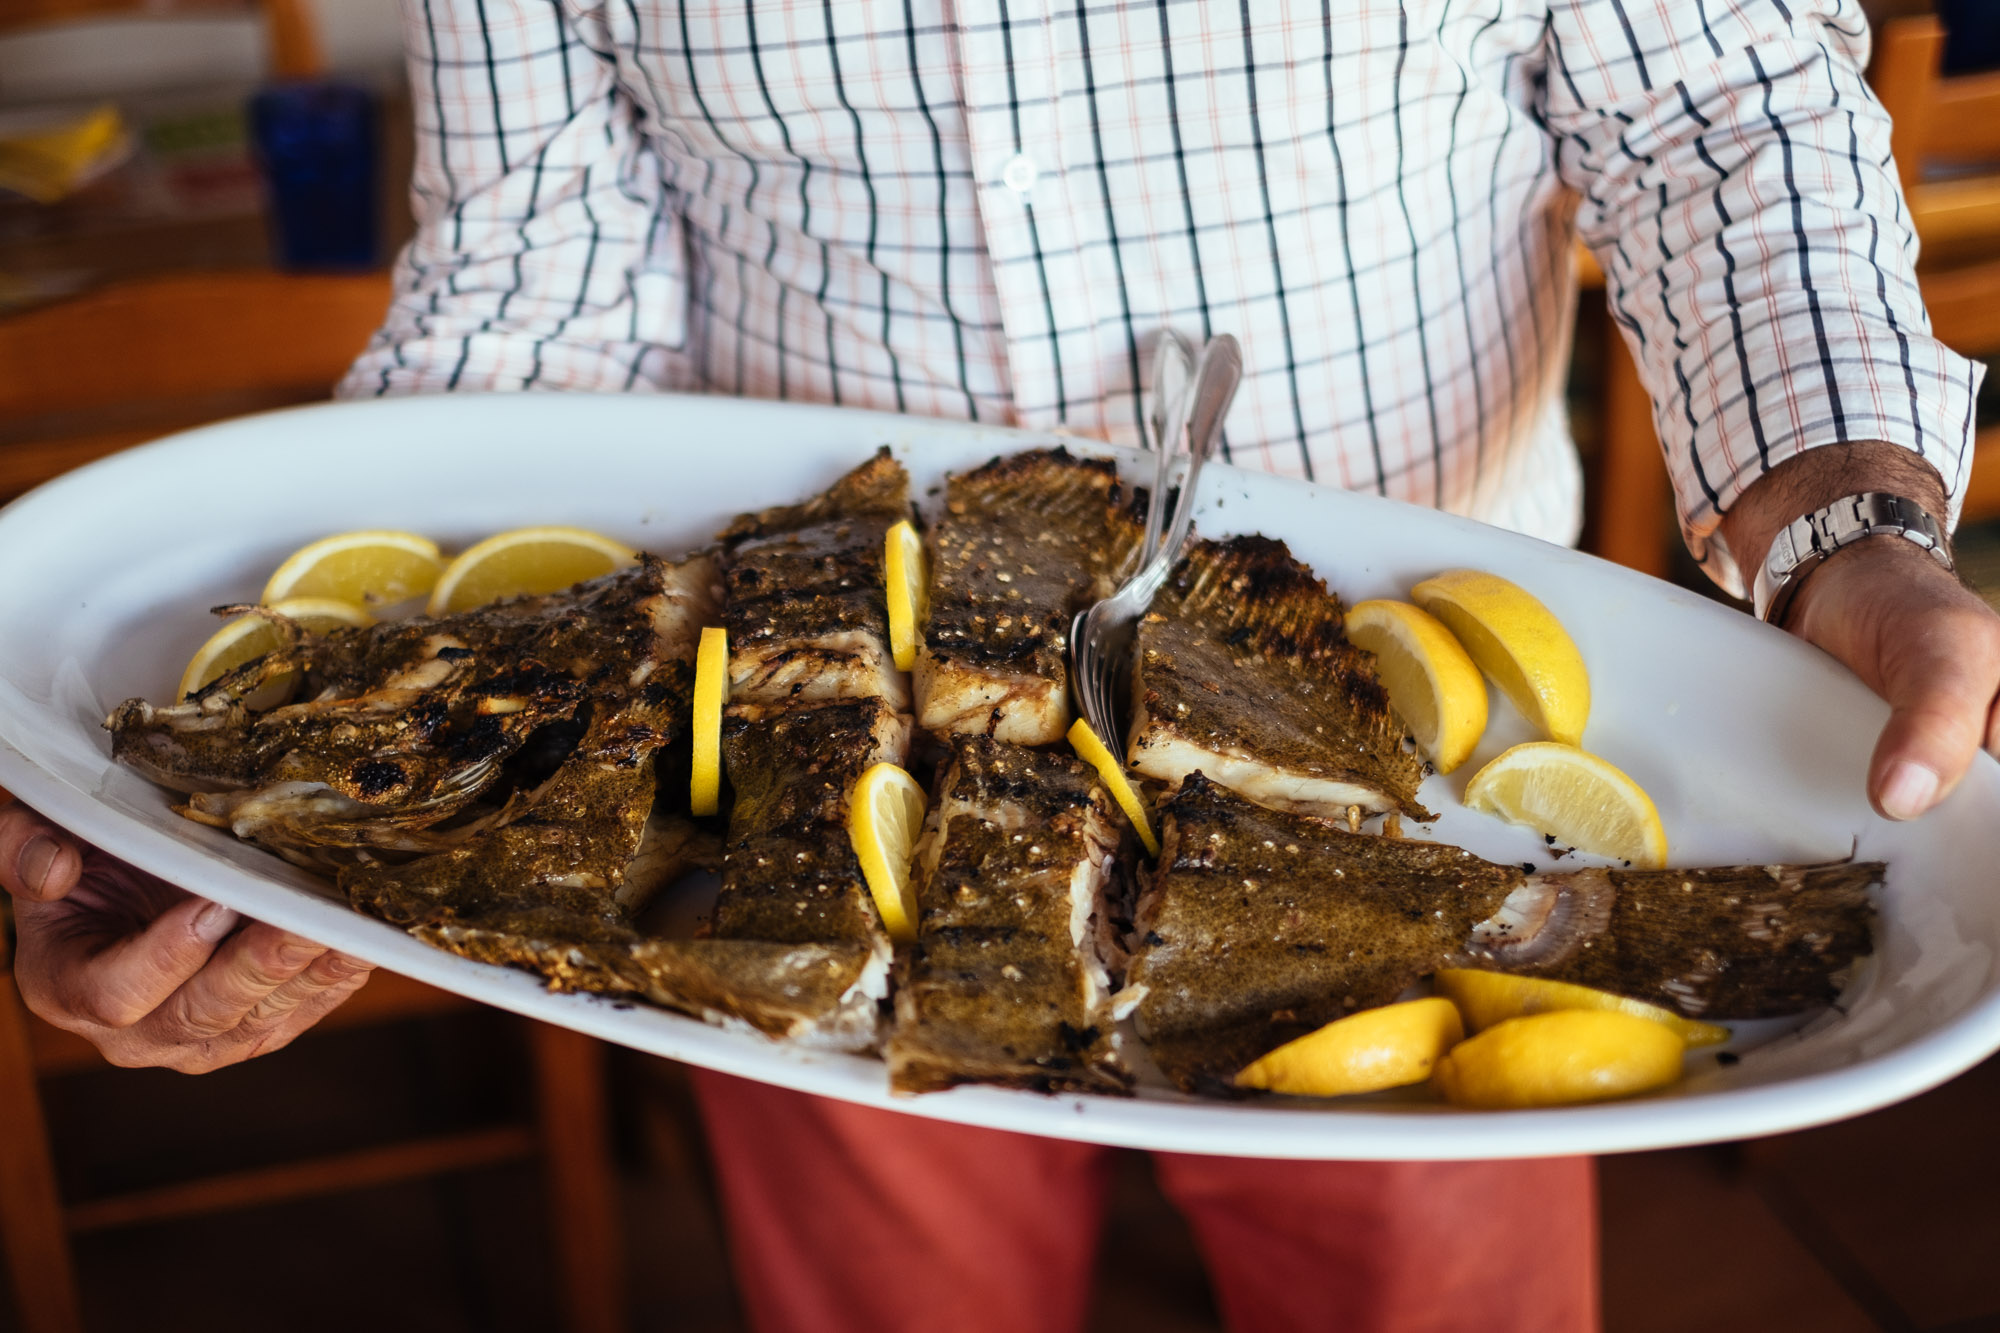 Foodie Portugal Travel: Grilled Turbot in the Alentejo - Arte e Sal restaurant, Sines - Emanuele Siracusa Food and Travel Photographer in Portugal